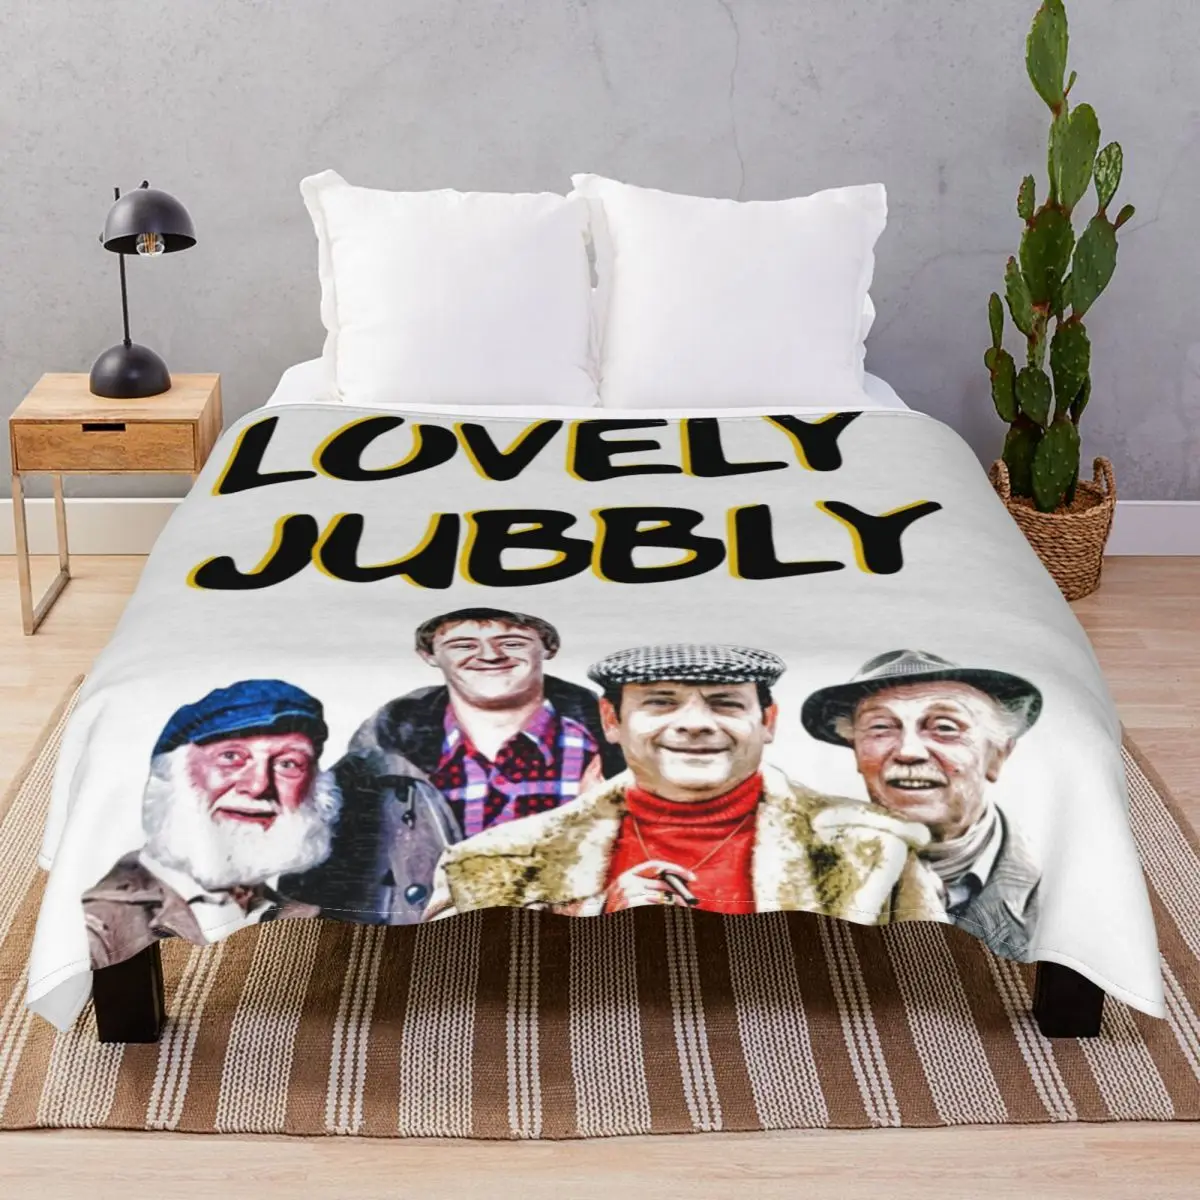 Lovely Jubbly Blanket Fleece All Season Soft Throw Blankets for Bedding Home Couch Travel Office